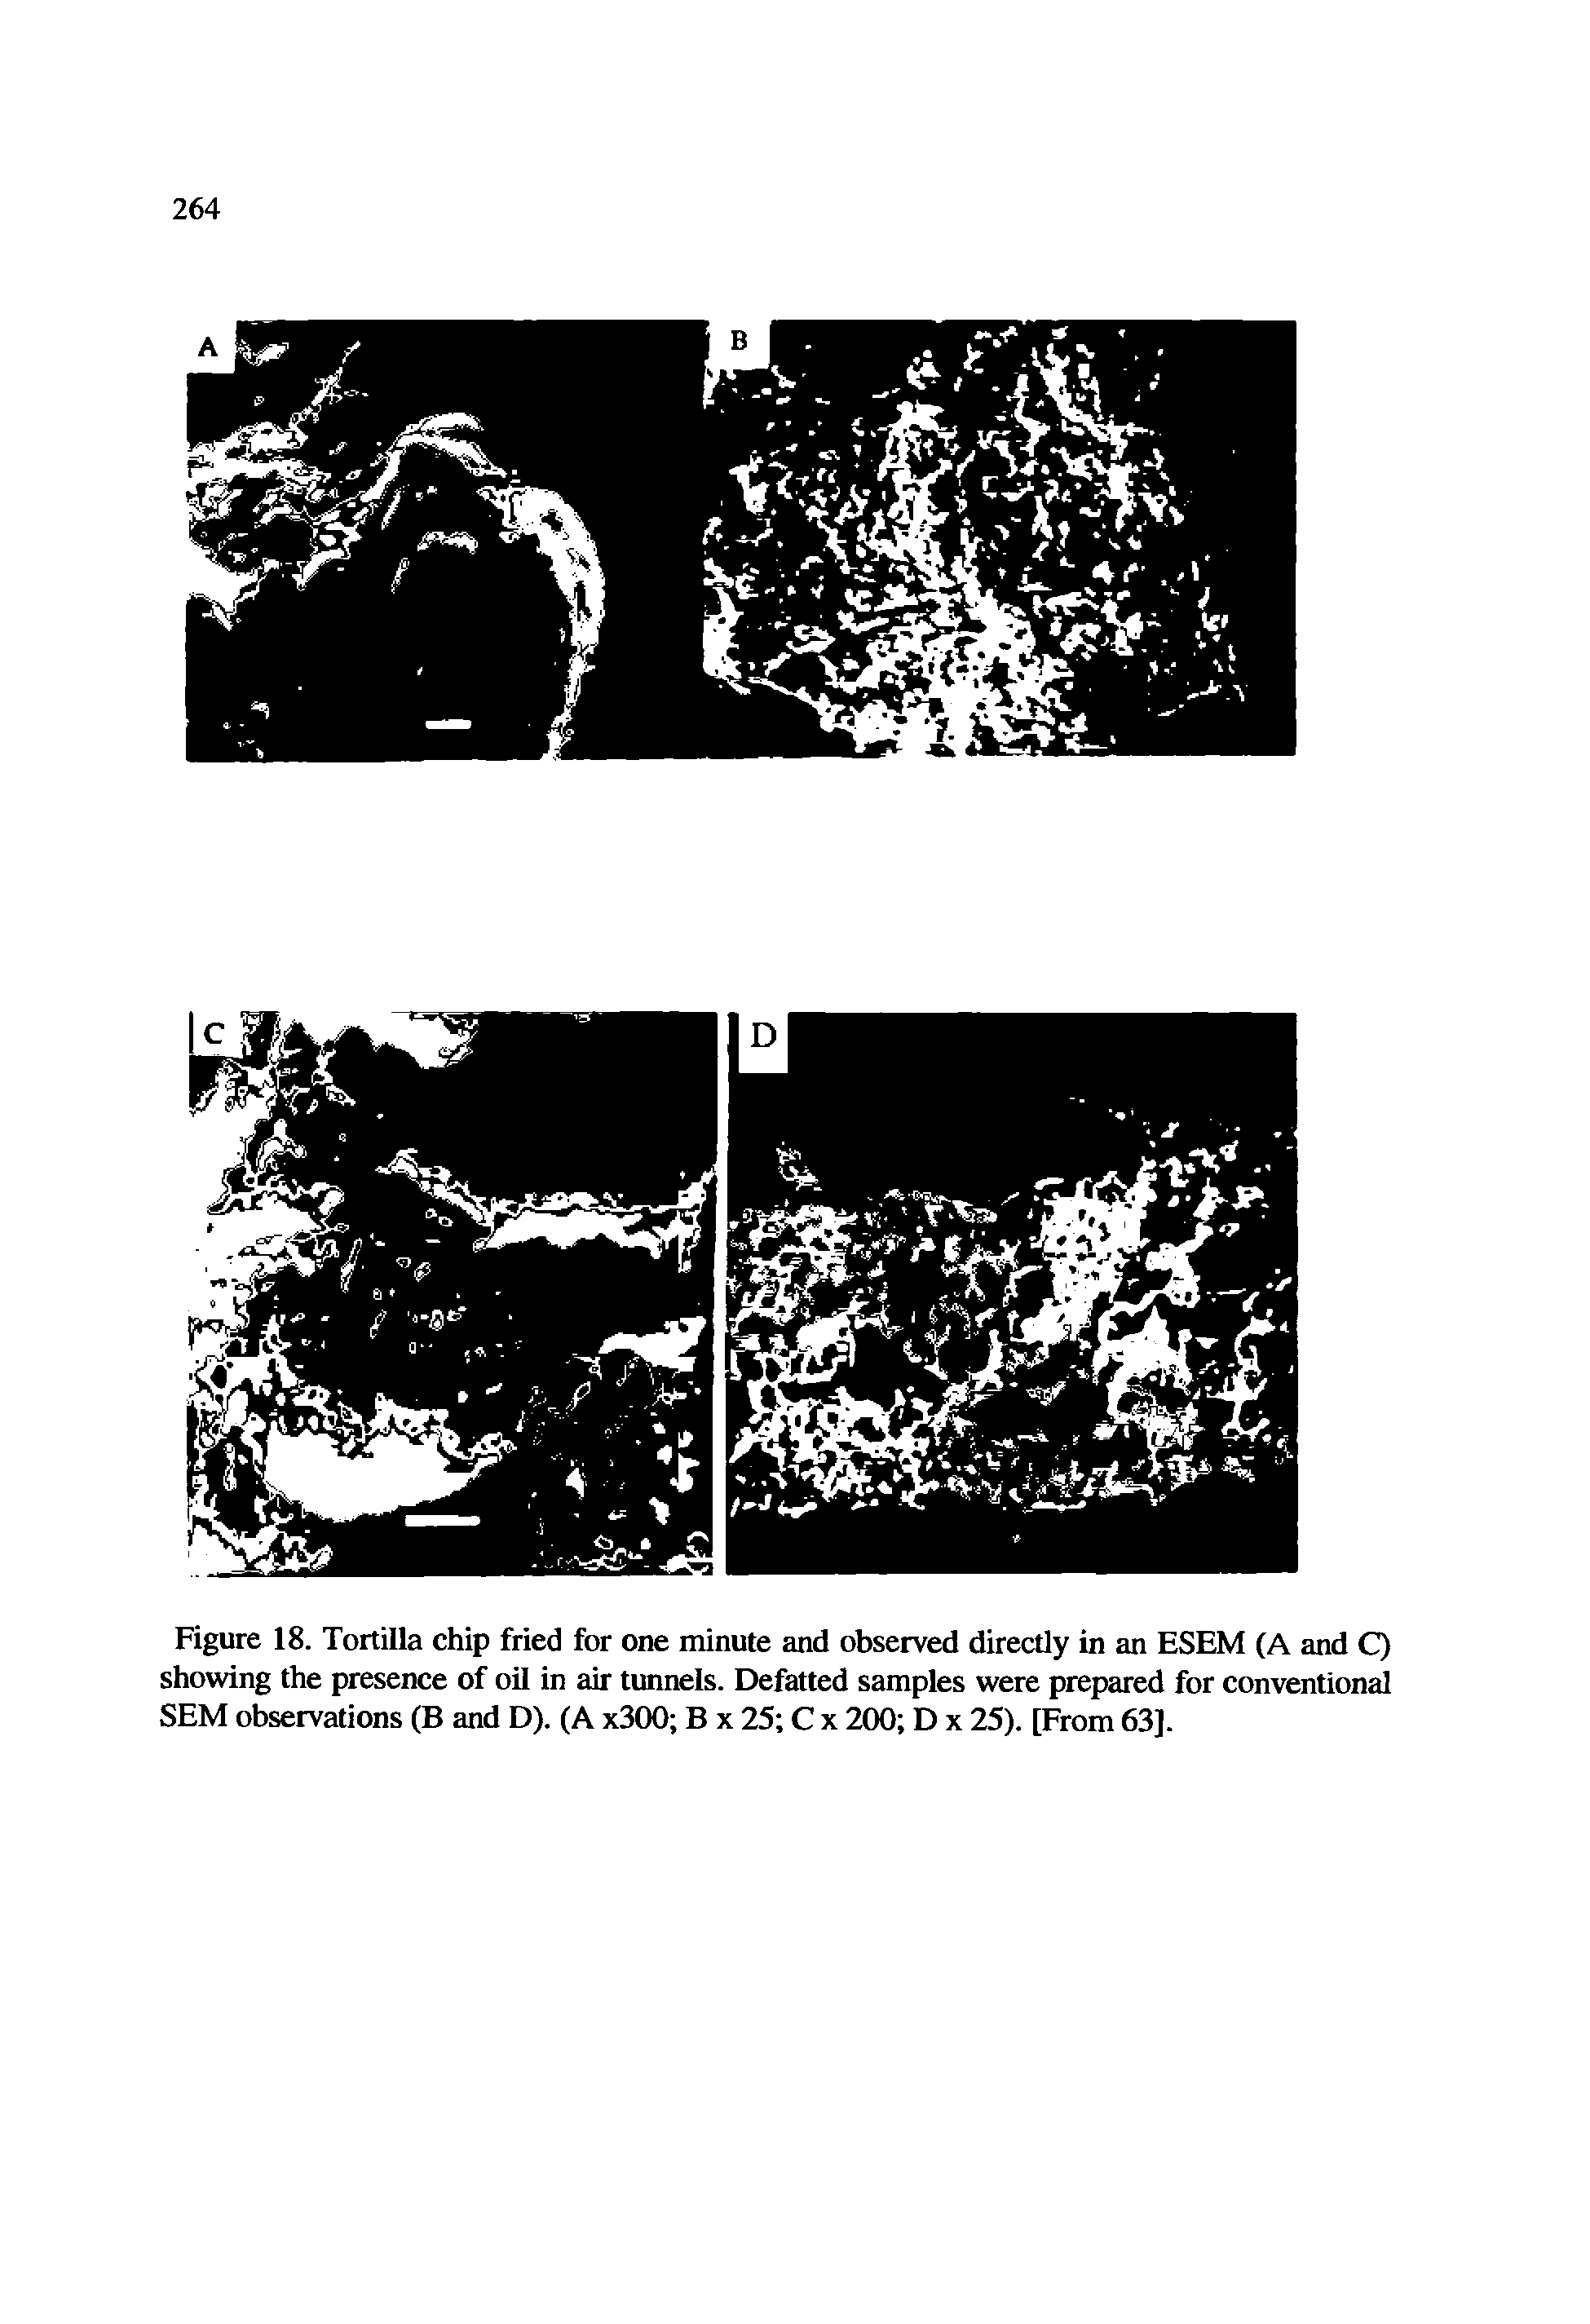 Figure 18. Tortilla chip fried for one minute and observed directly in an ESEM (A and Q showing the presence of oil in air tunnels. Defatted samples were prepared for conventional SEM observations (B and D). (A x300 B x 25 C x 200 D x 25). [From 63].